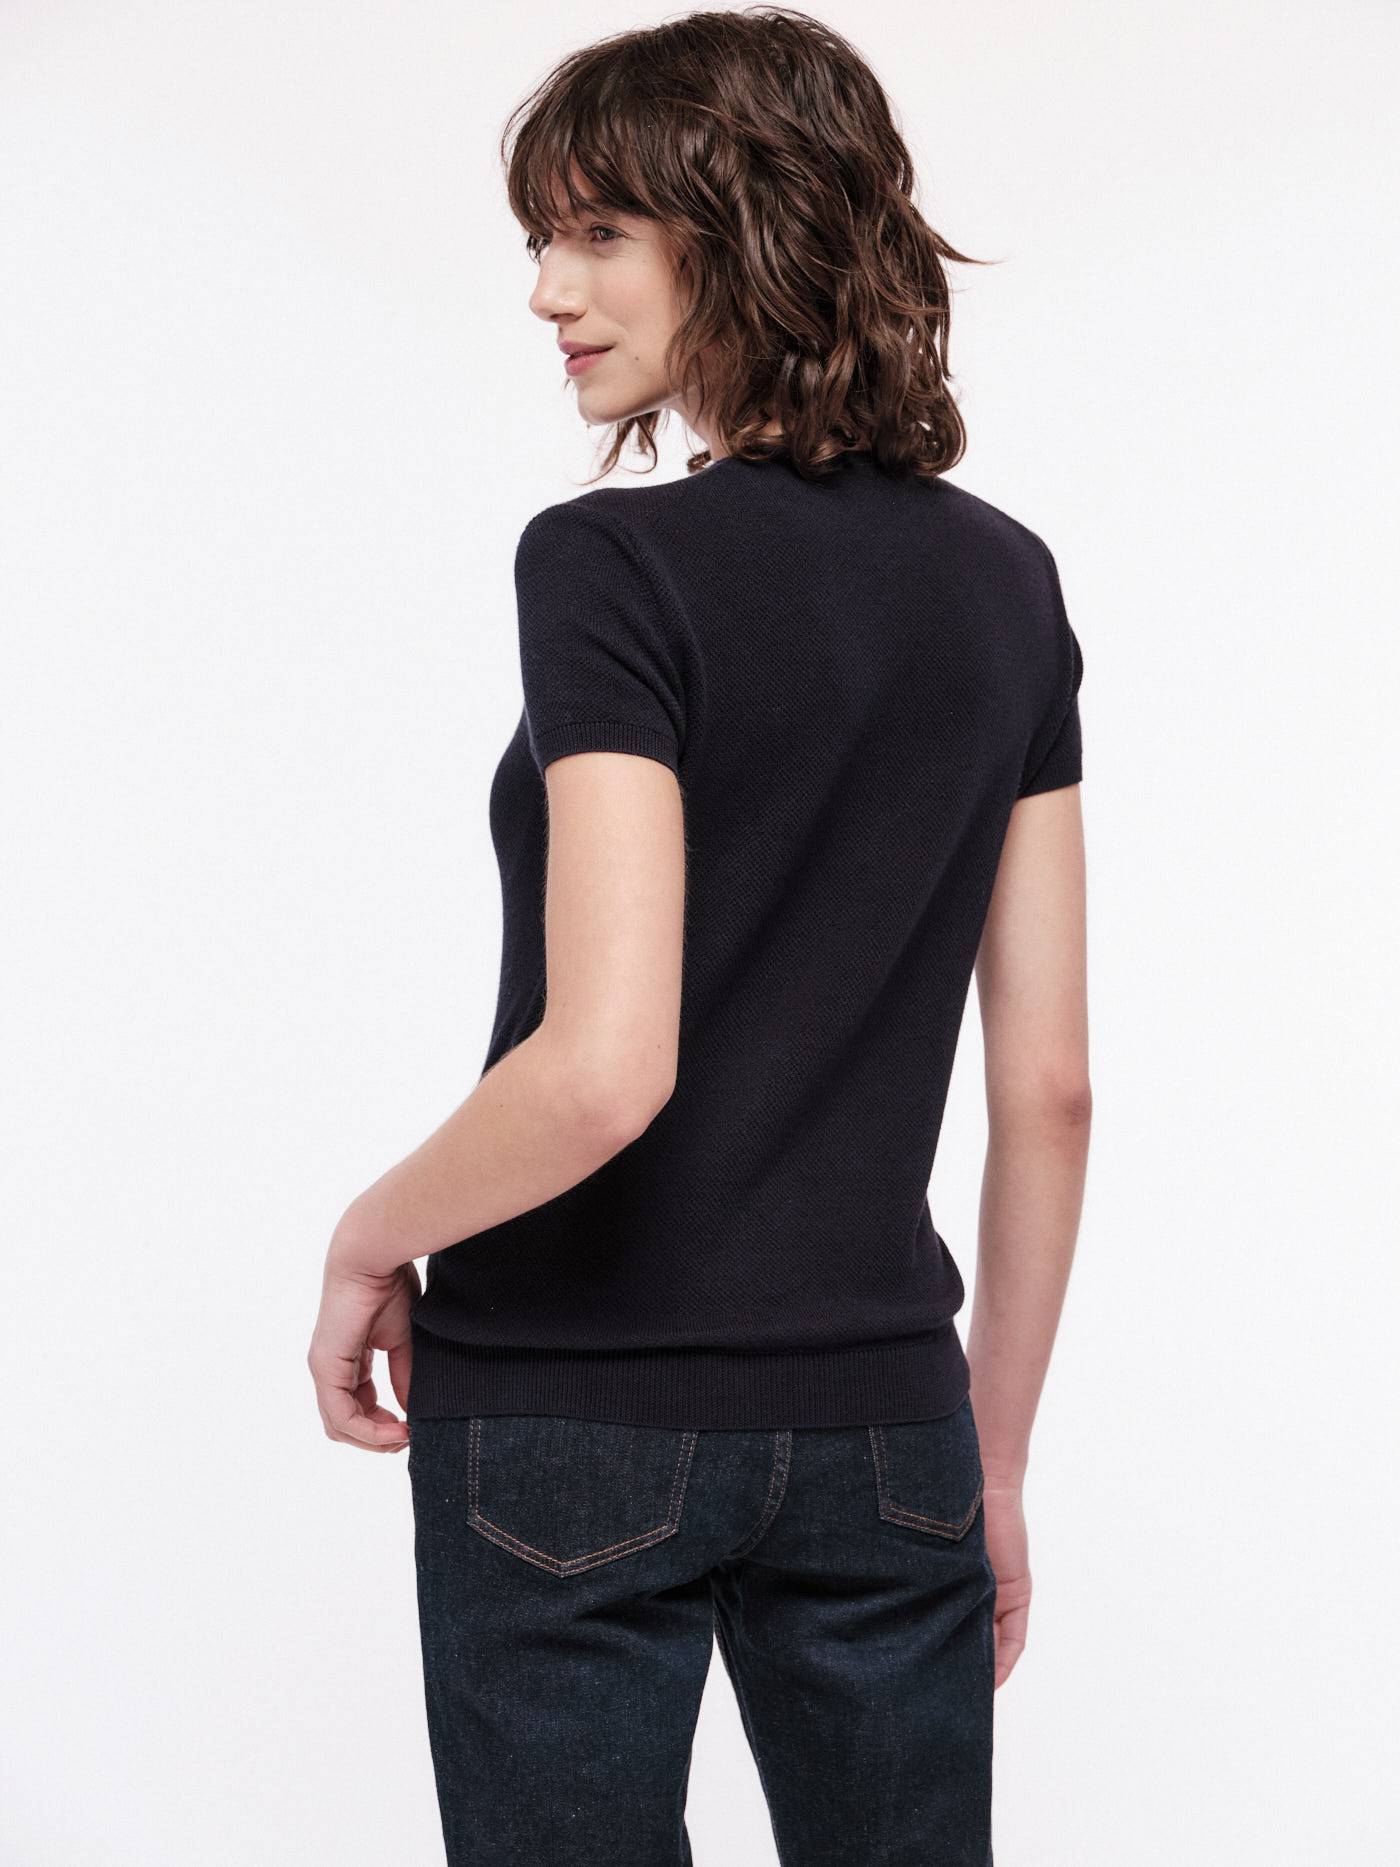 Short sleeved sweater from LANIUS